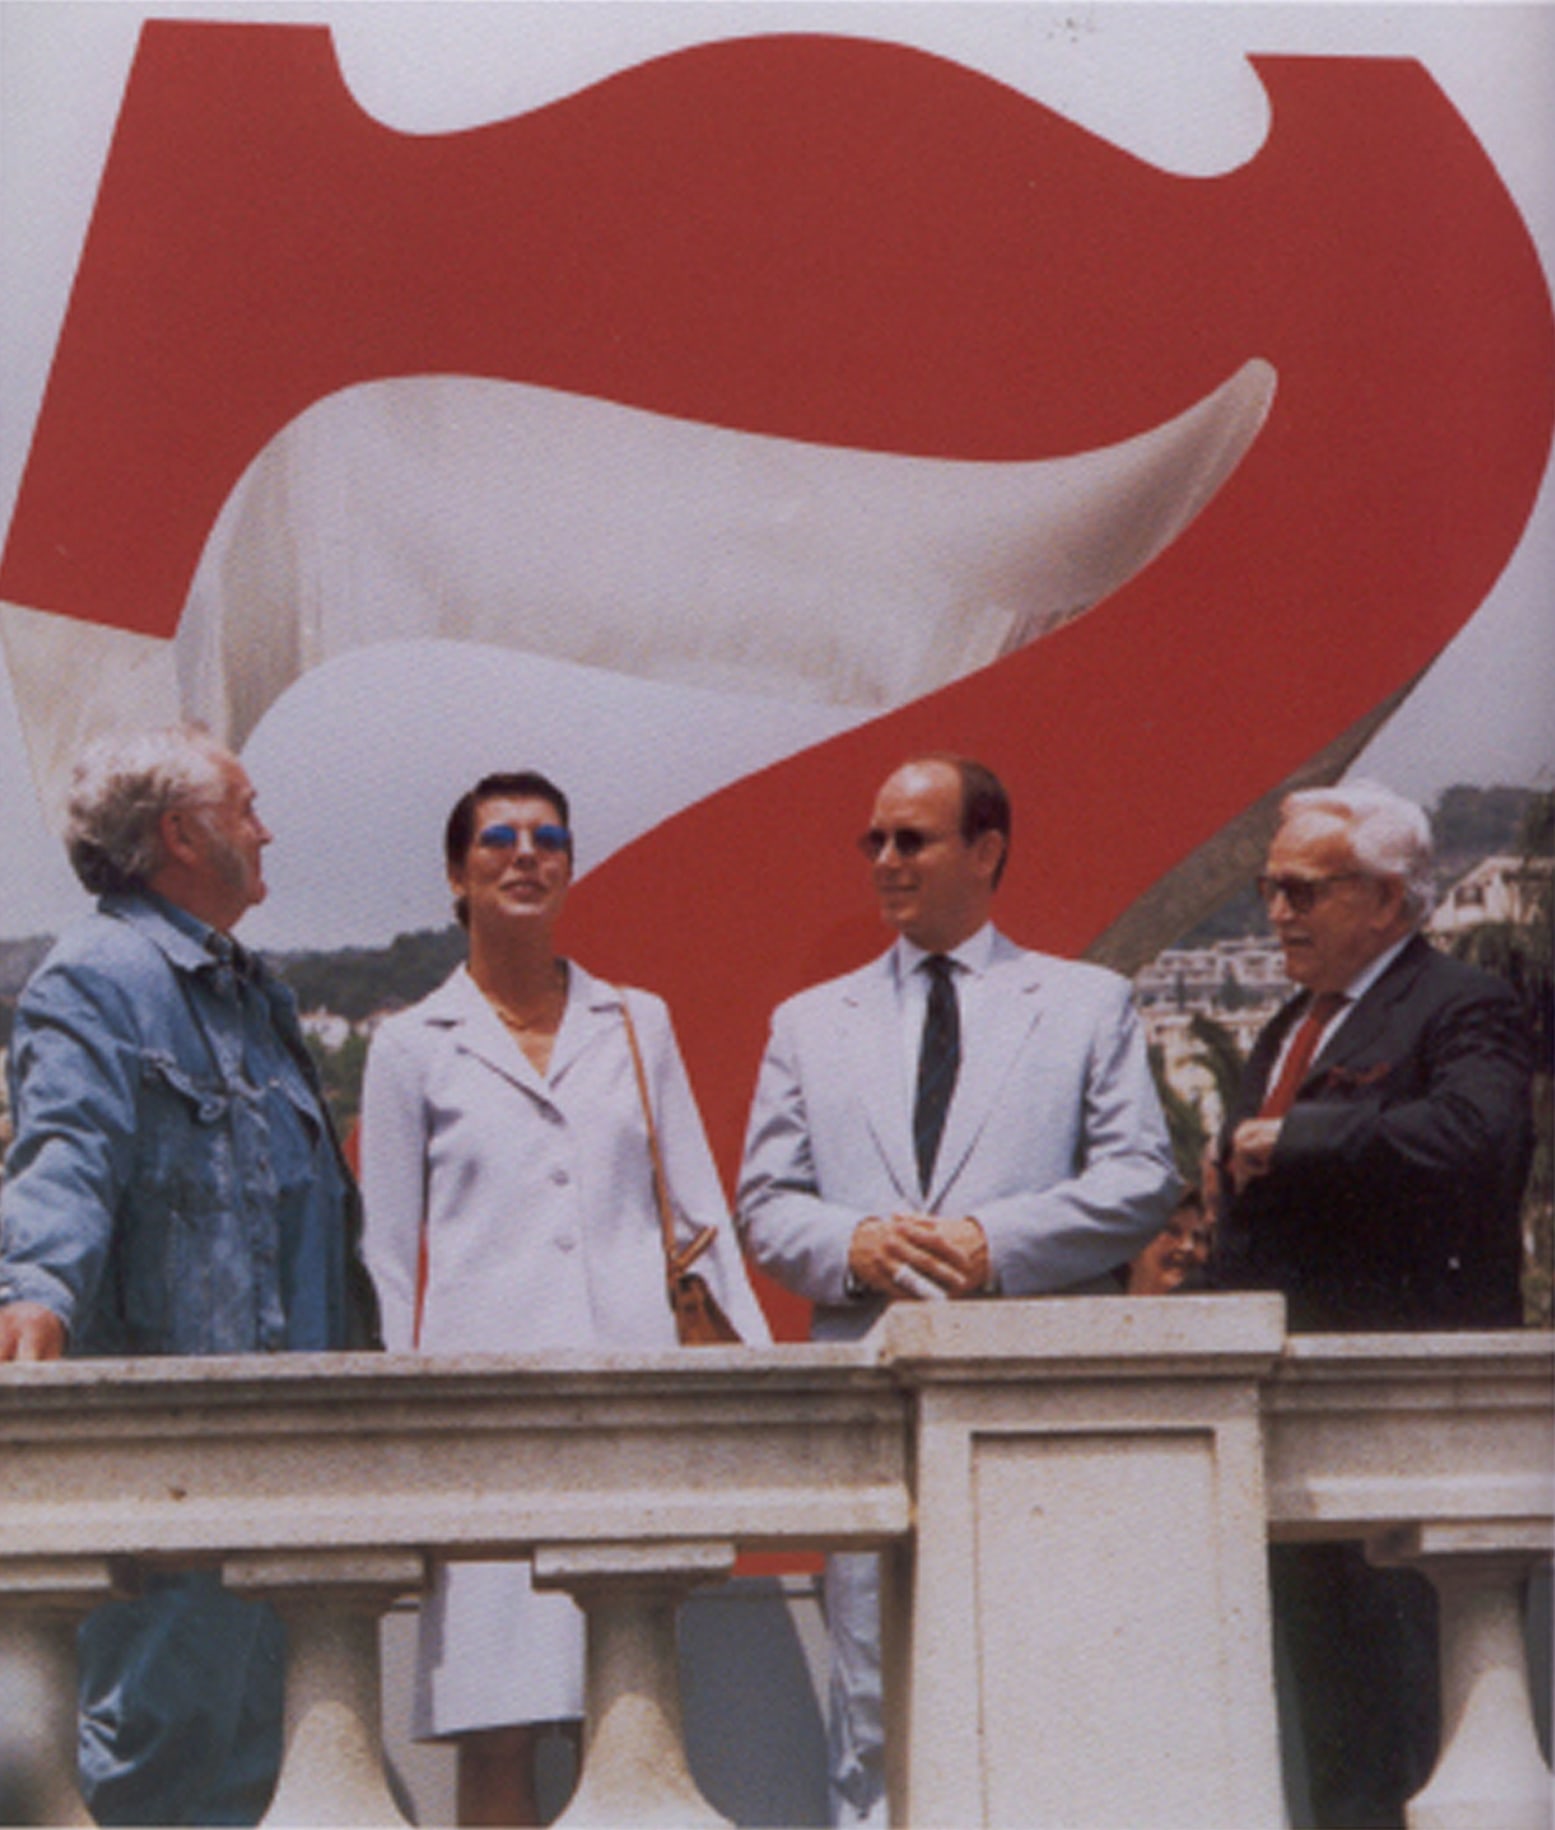 Left to right: Indiana, Princess Stephanie of Monaco, Prince Albert II of Monaco, and Prince Rainier III of Monaco, in front of Indiana&rsquo;s sculpture Seven in Monte Carlo, 1997